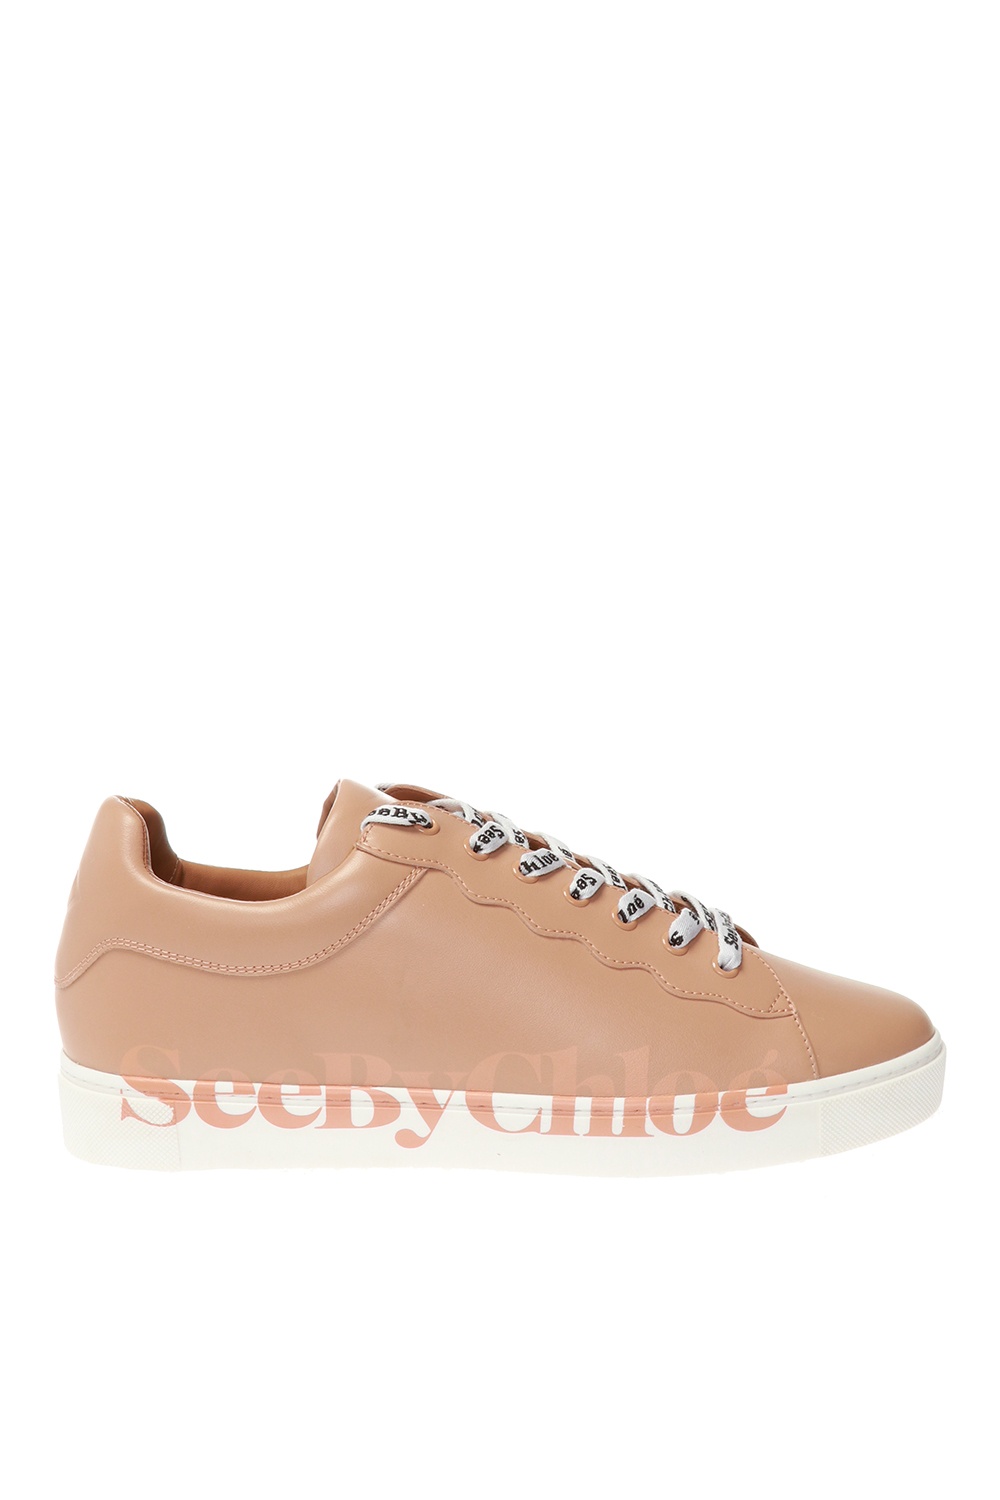 ‘Essie’ sneakers with logo See By Chloé - Vitkac France